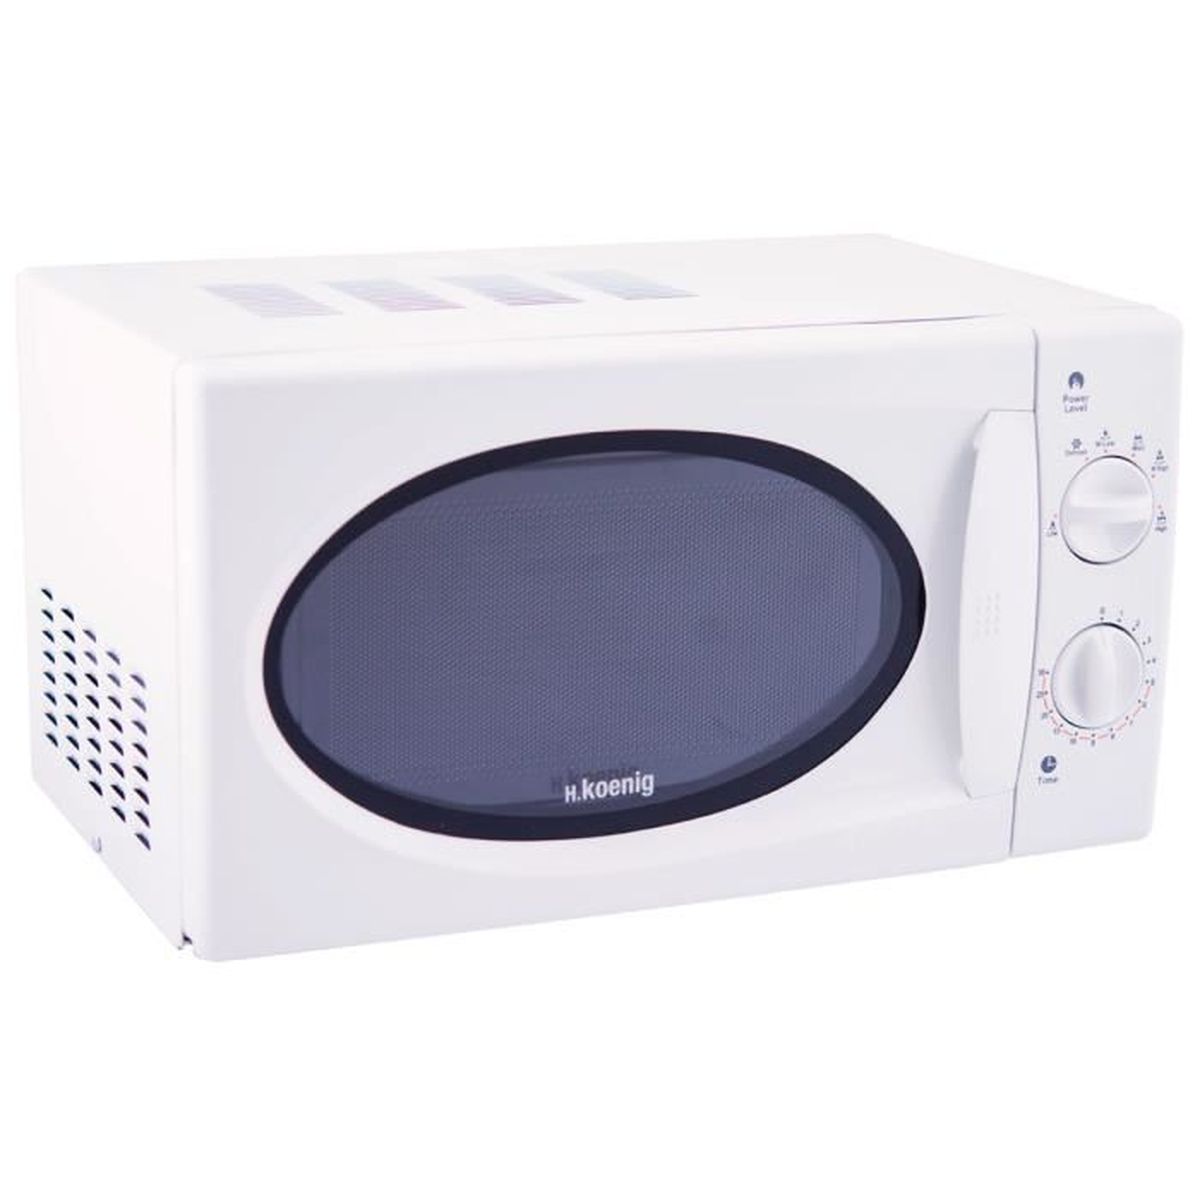 Micro ondes samsung 28 litres - Cdiscount